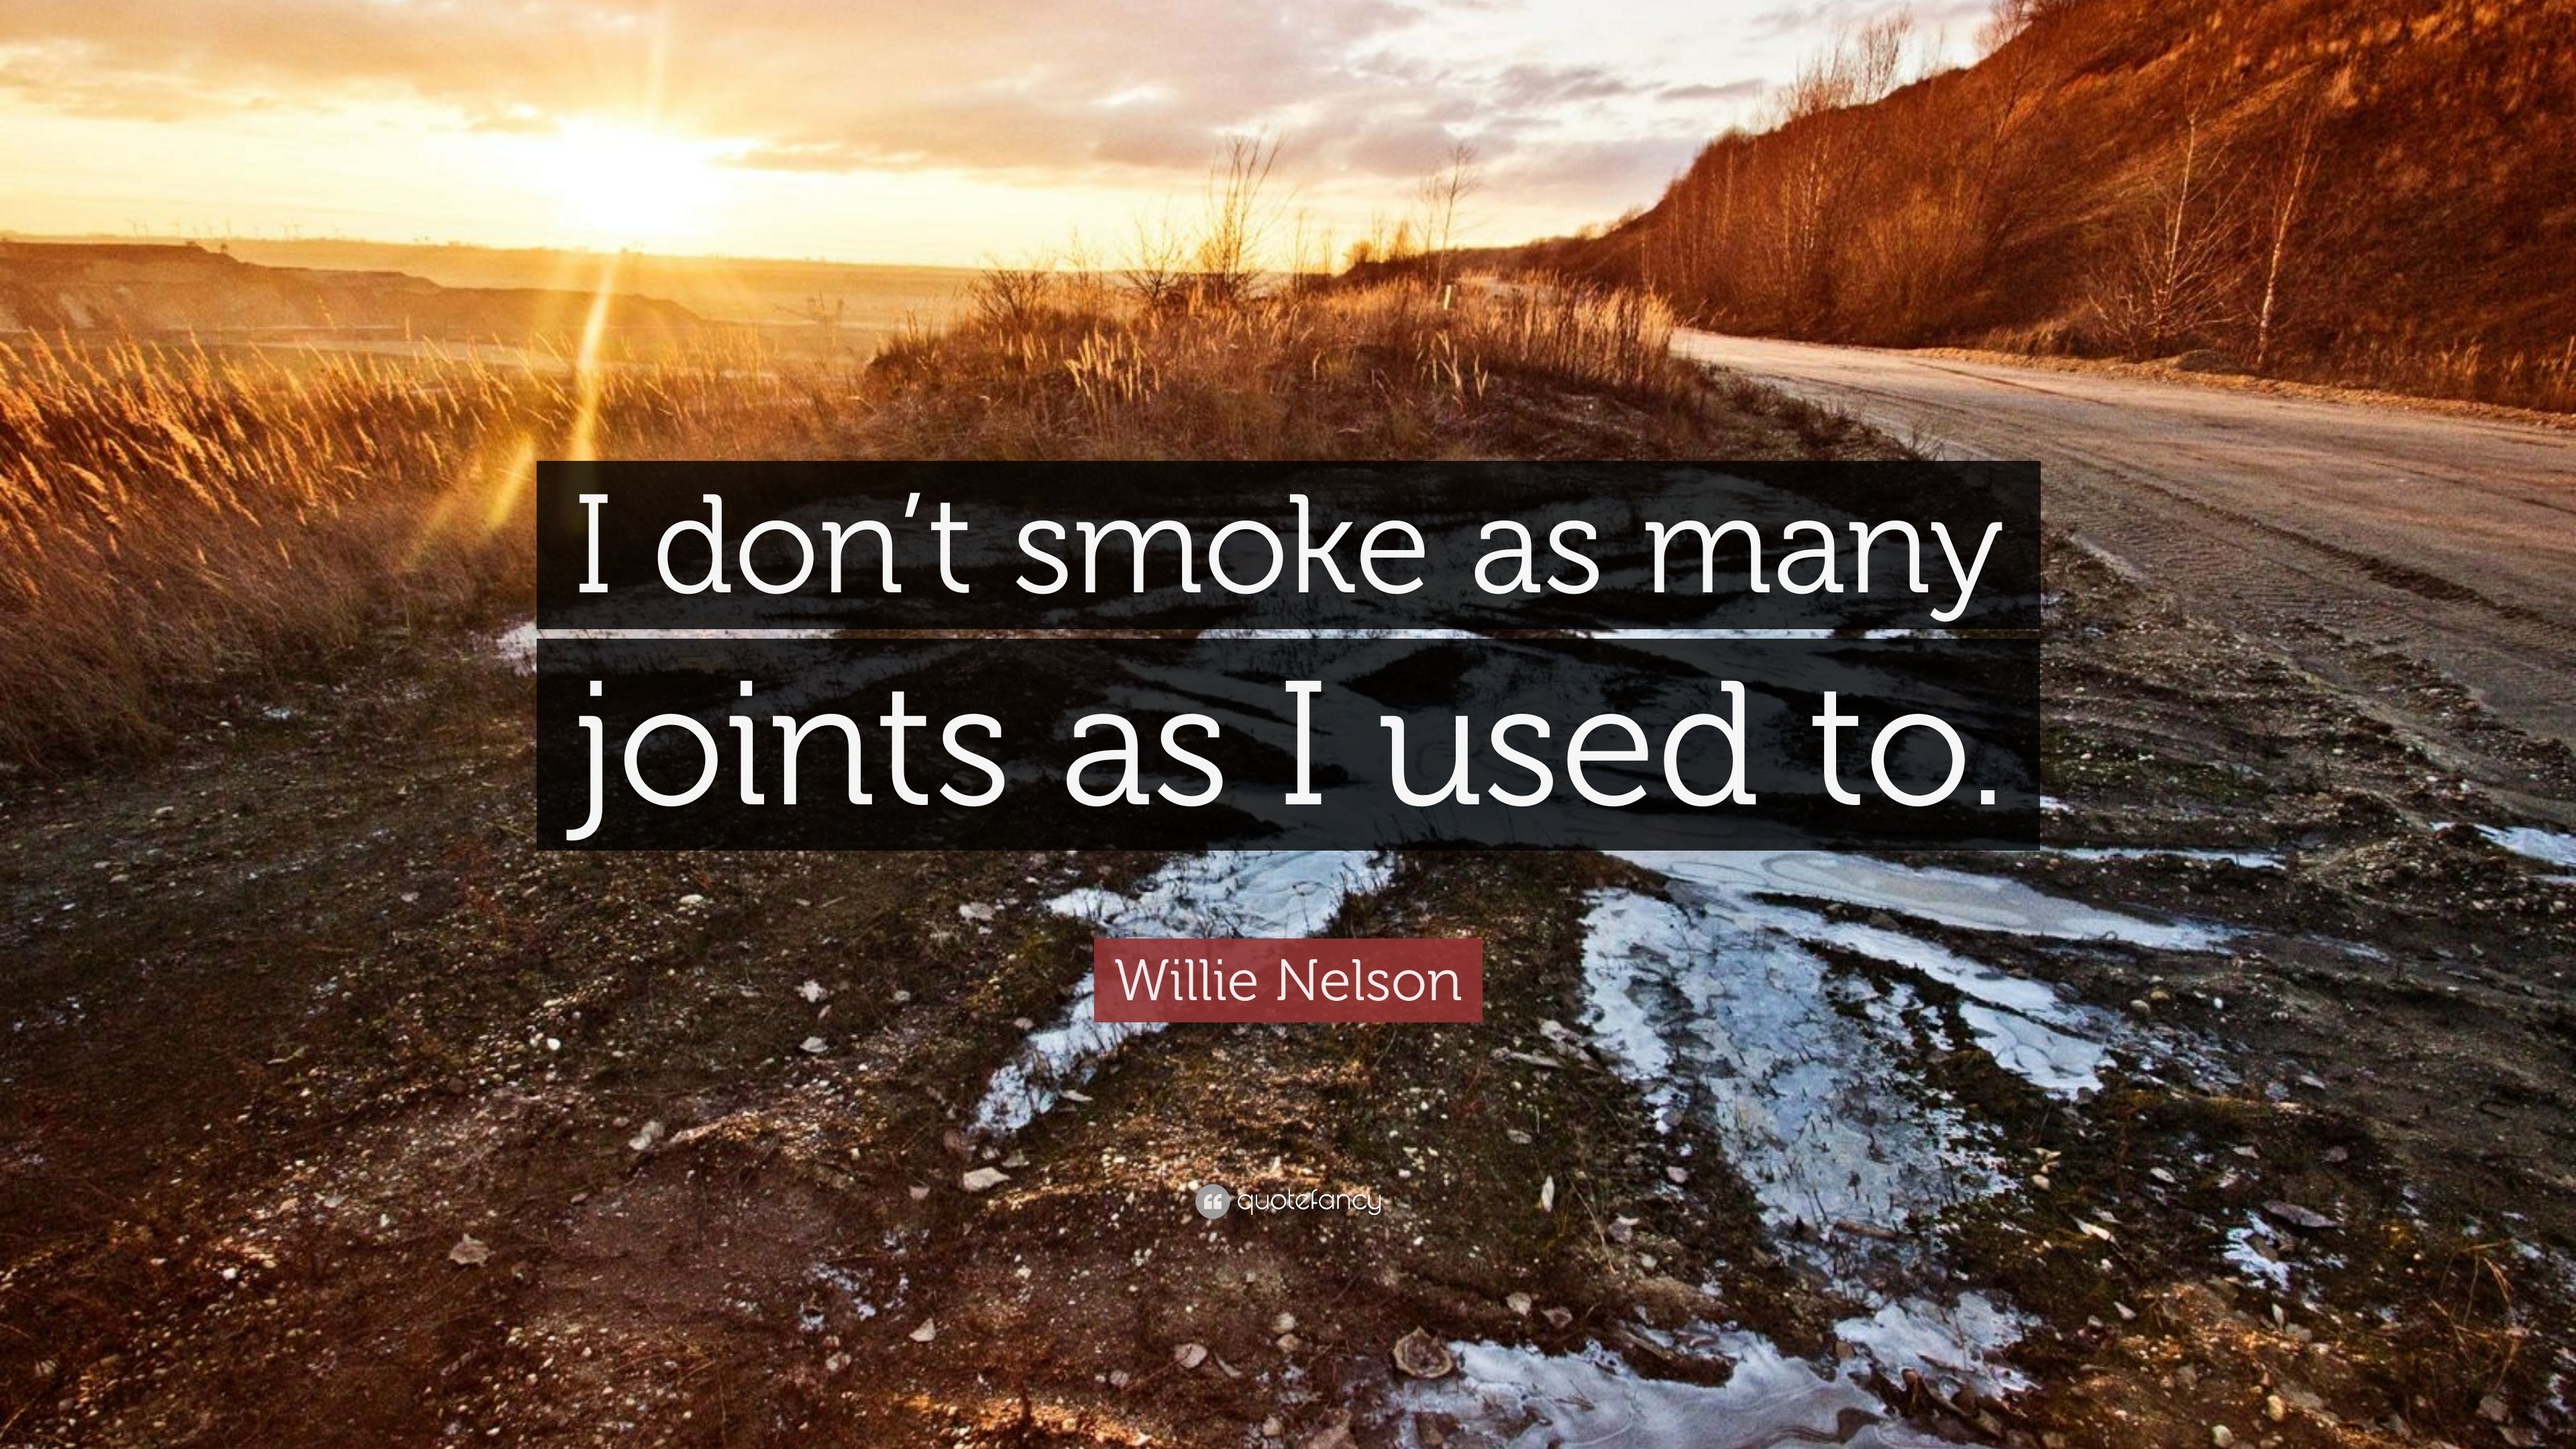 Willie Nelson Quote: “I don't smoke as many joints as I used to.” (10 wallpaper)